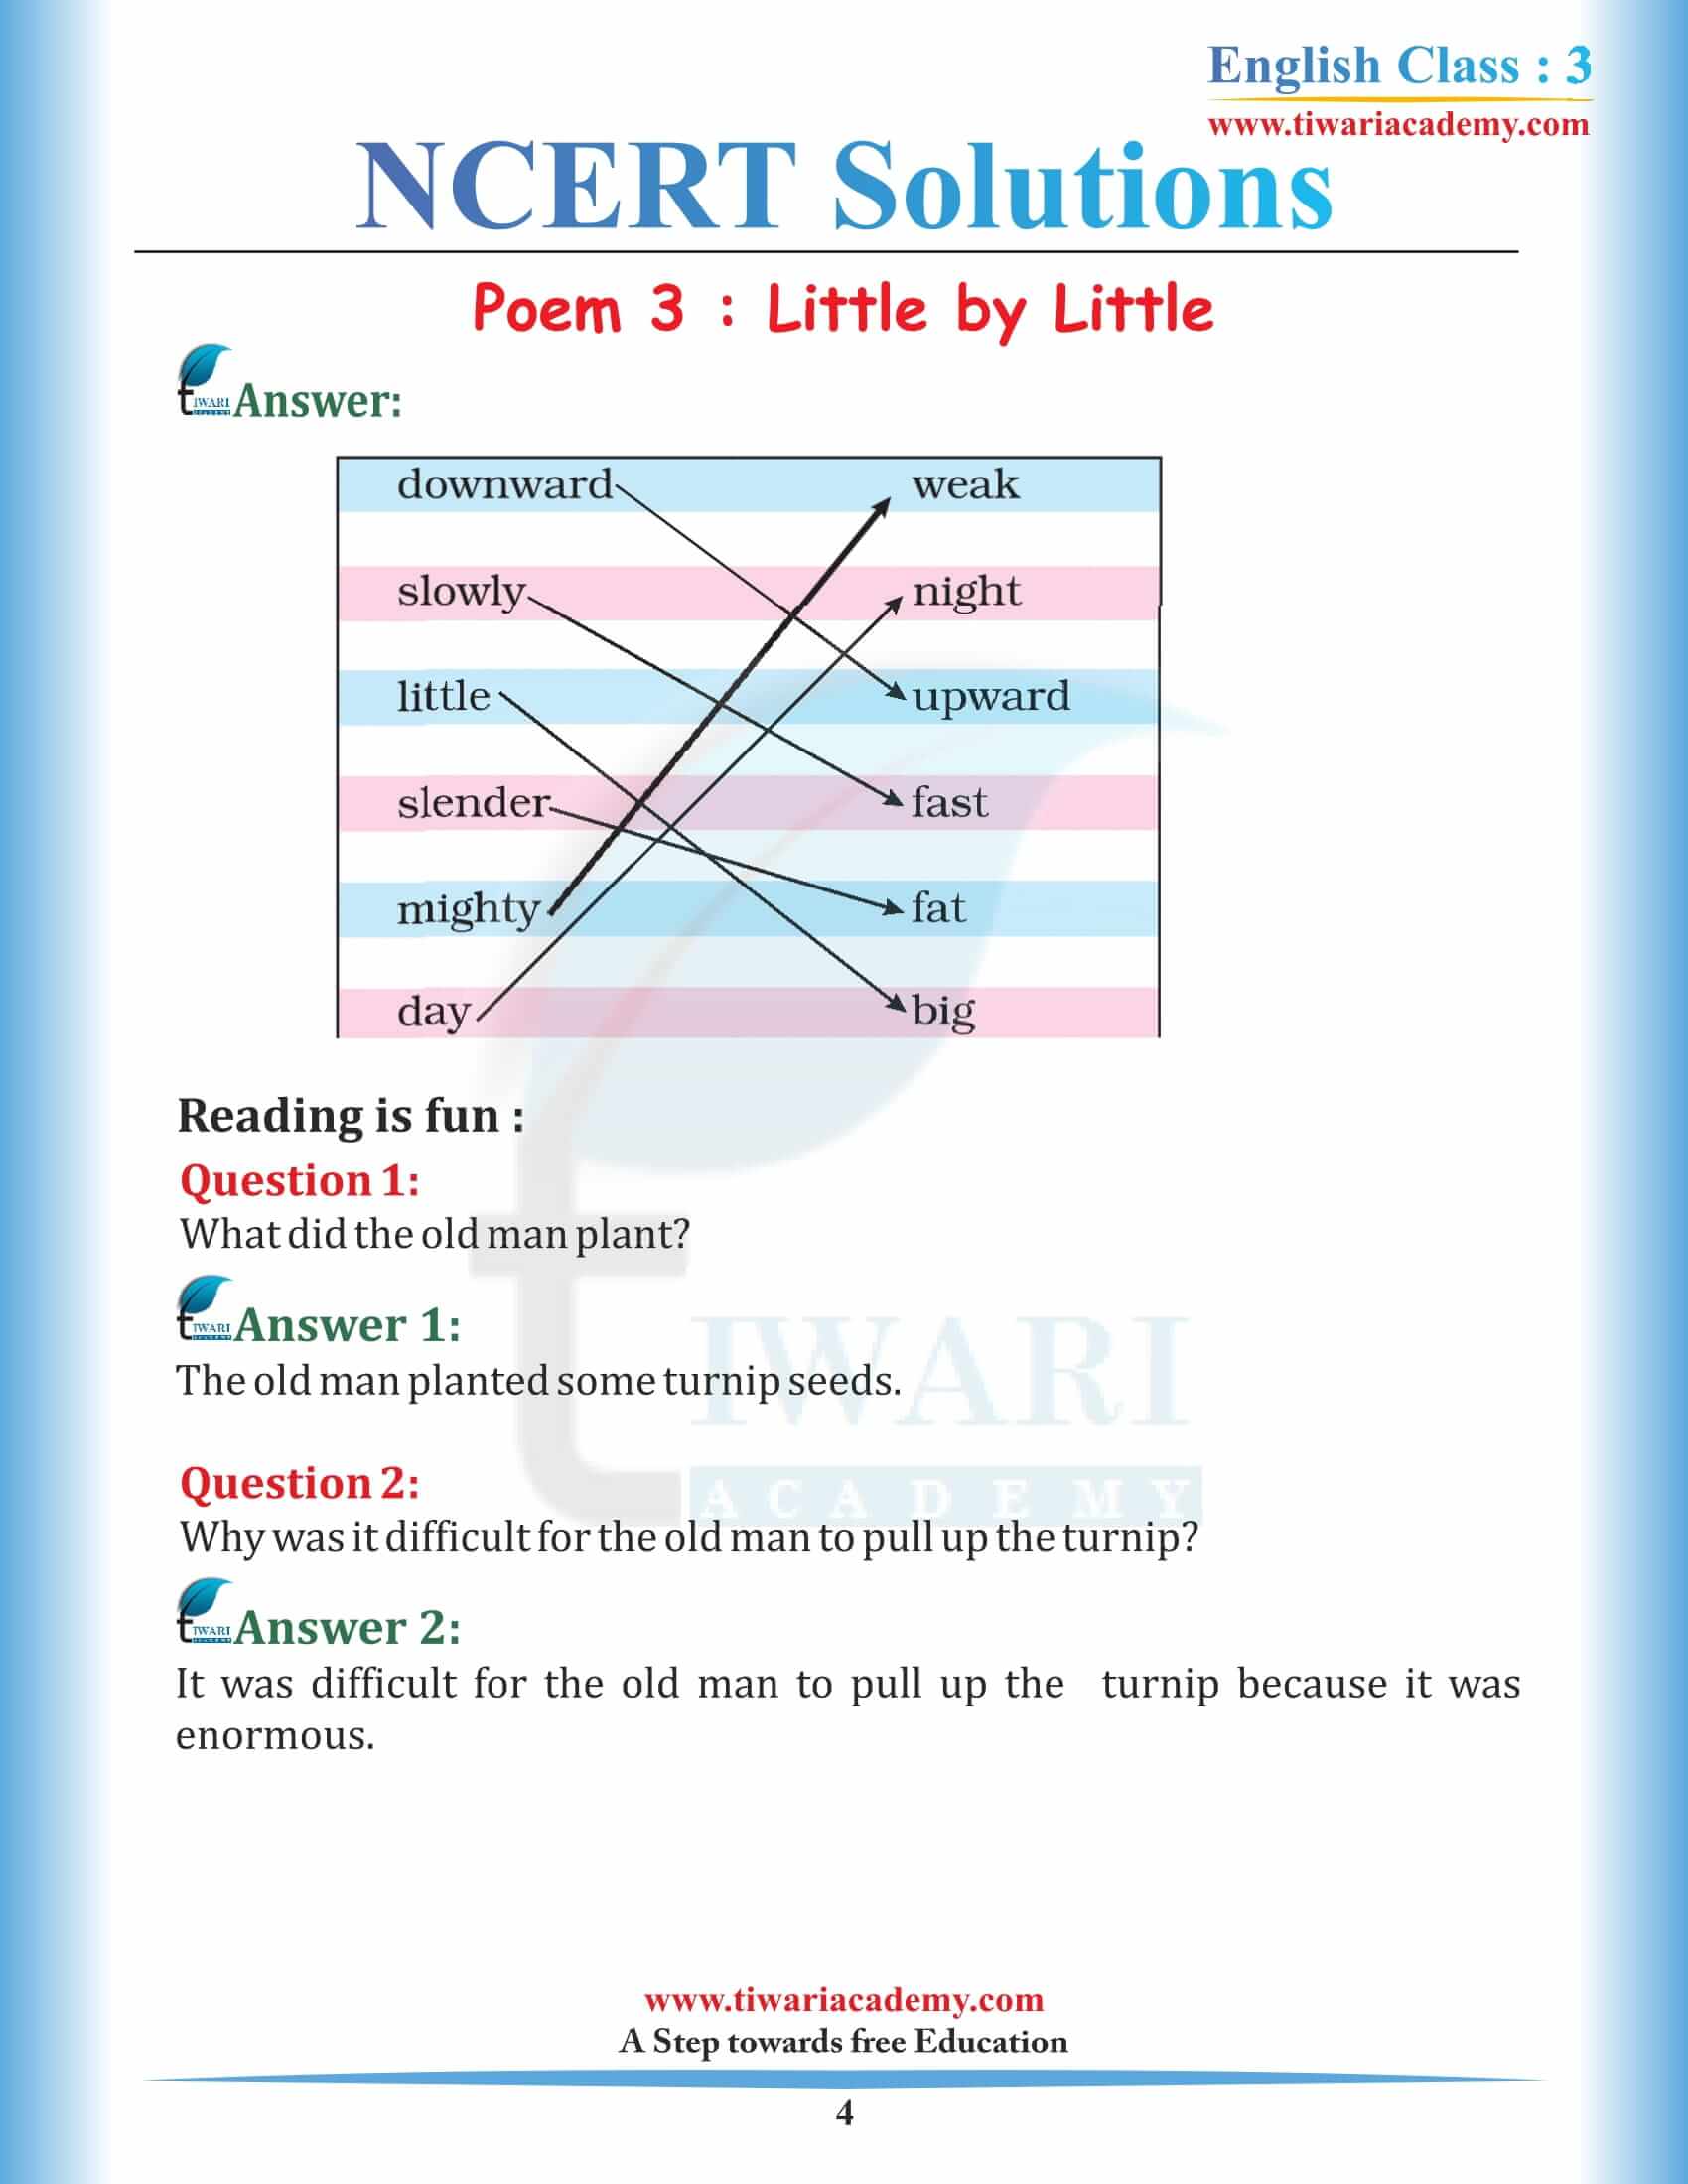 NCERT Solutions for Class 3 English Unit 3